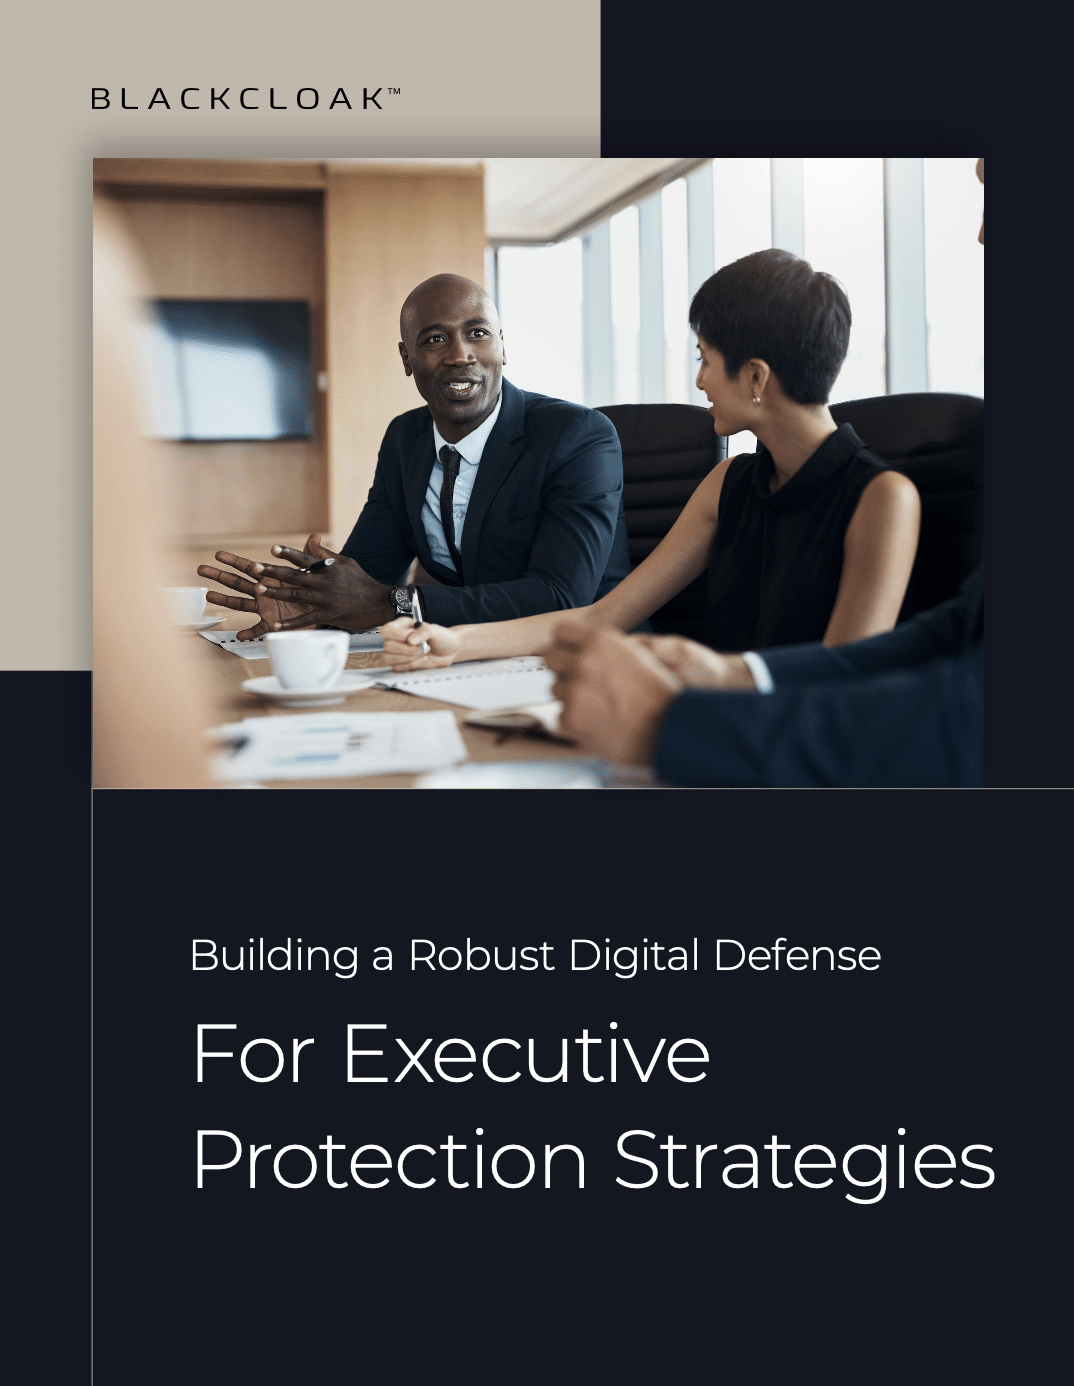 Building a Robust Digital Defense: For Executive Protection Strategies